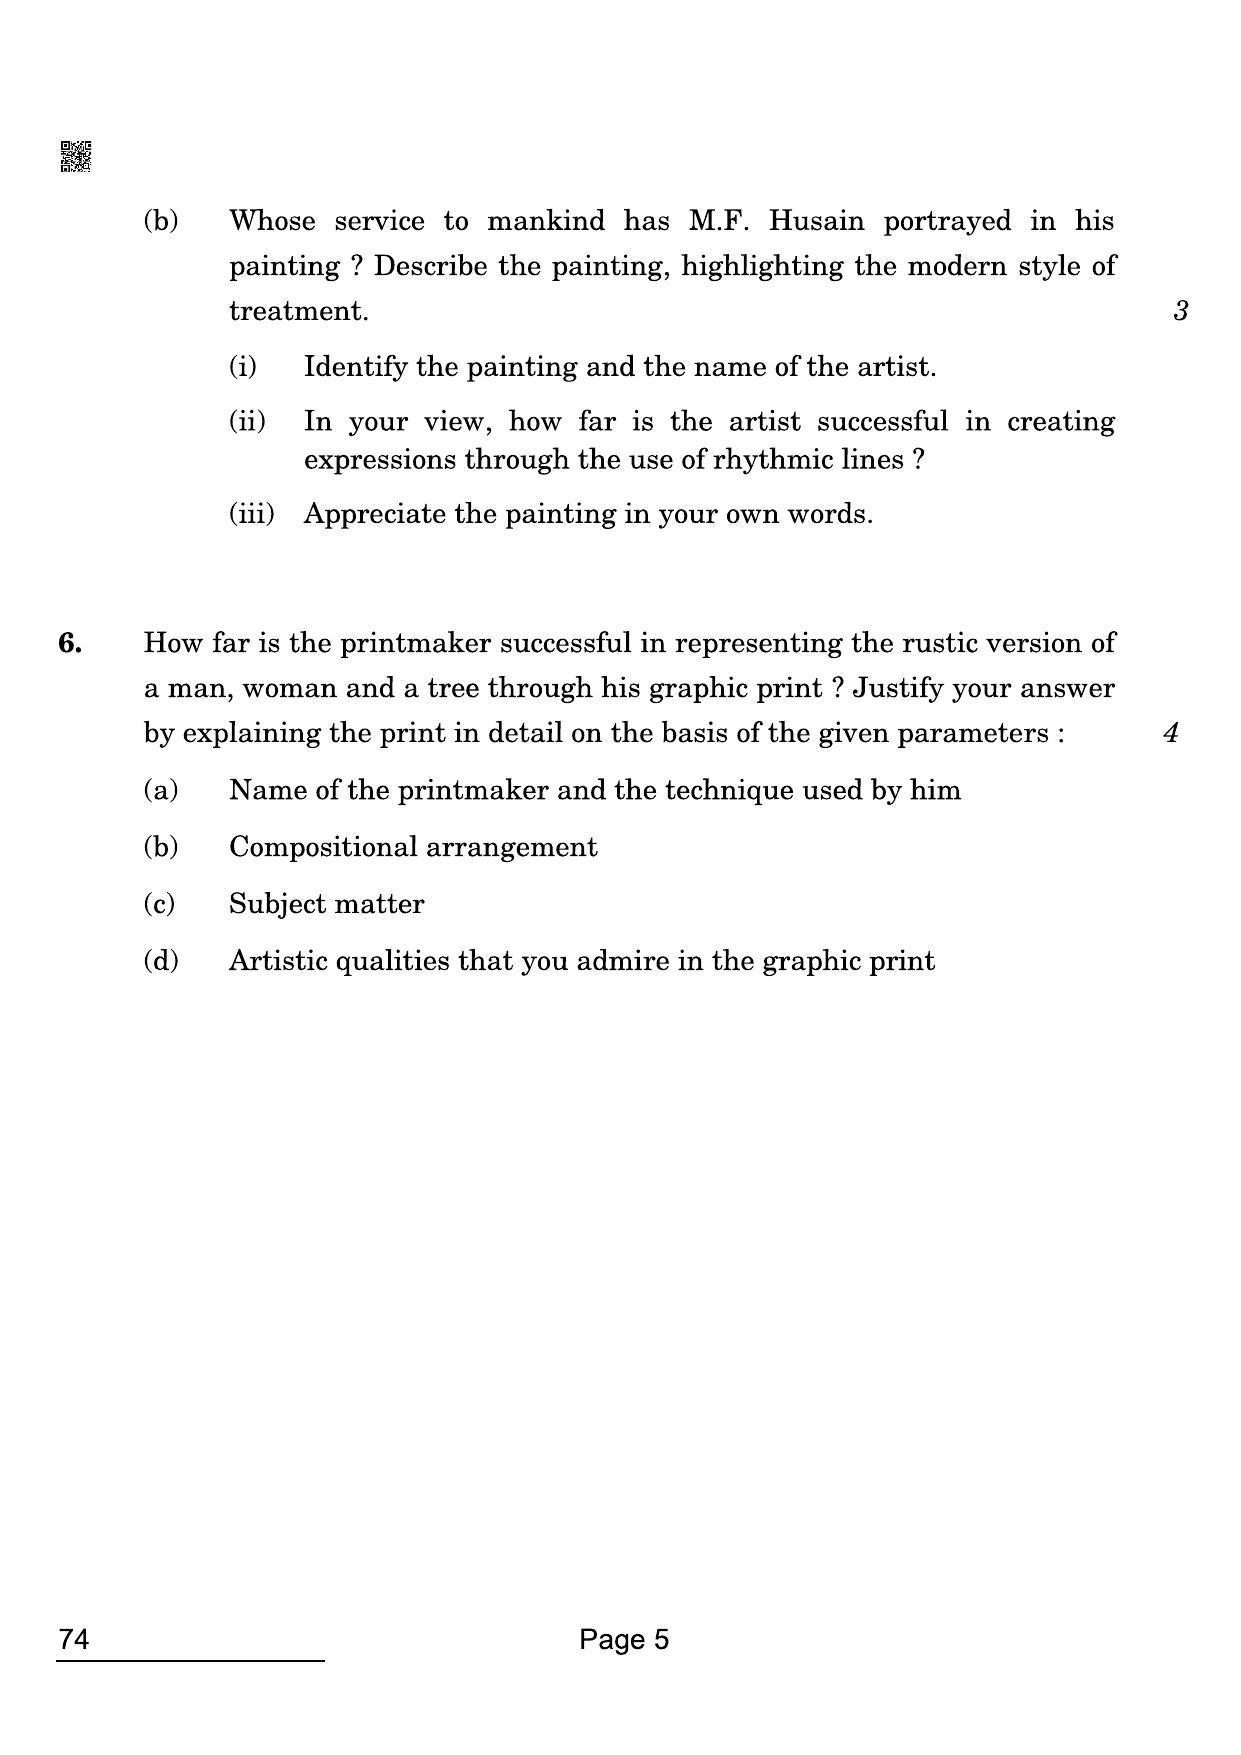 CBSE Class 12 74 Graphics 2022 Compartment Question Paper - Page 5